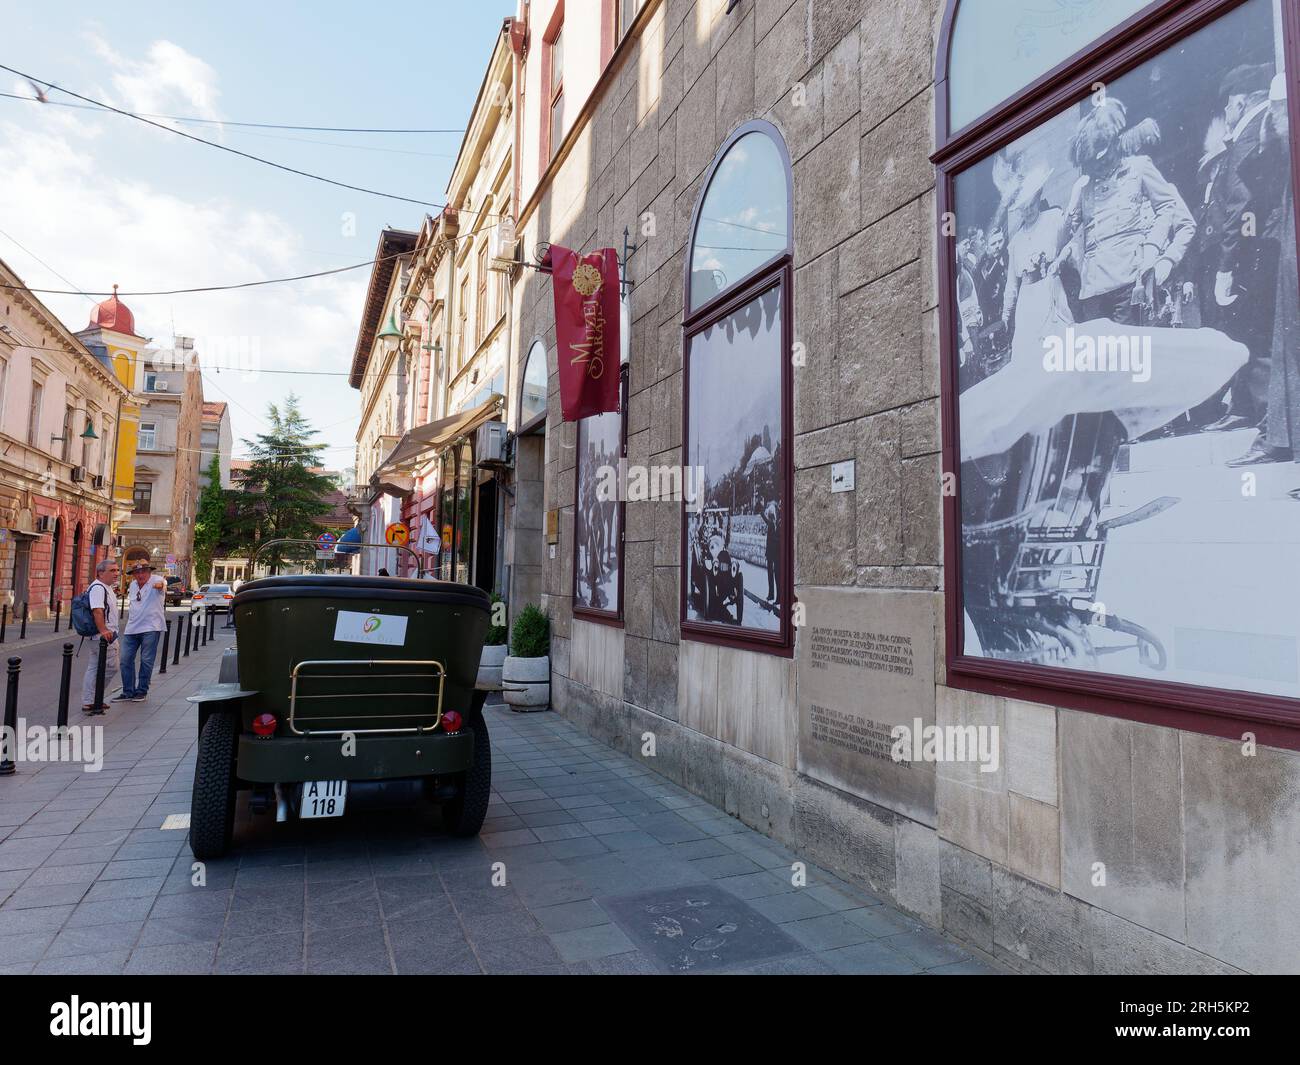 Replica Gräf & Stift open topped touring car at the site of the 1914 Sarajevo assassination. Sarajevo, Bosnia and Herzegovina, August 13, 2023. Stock Photo